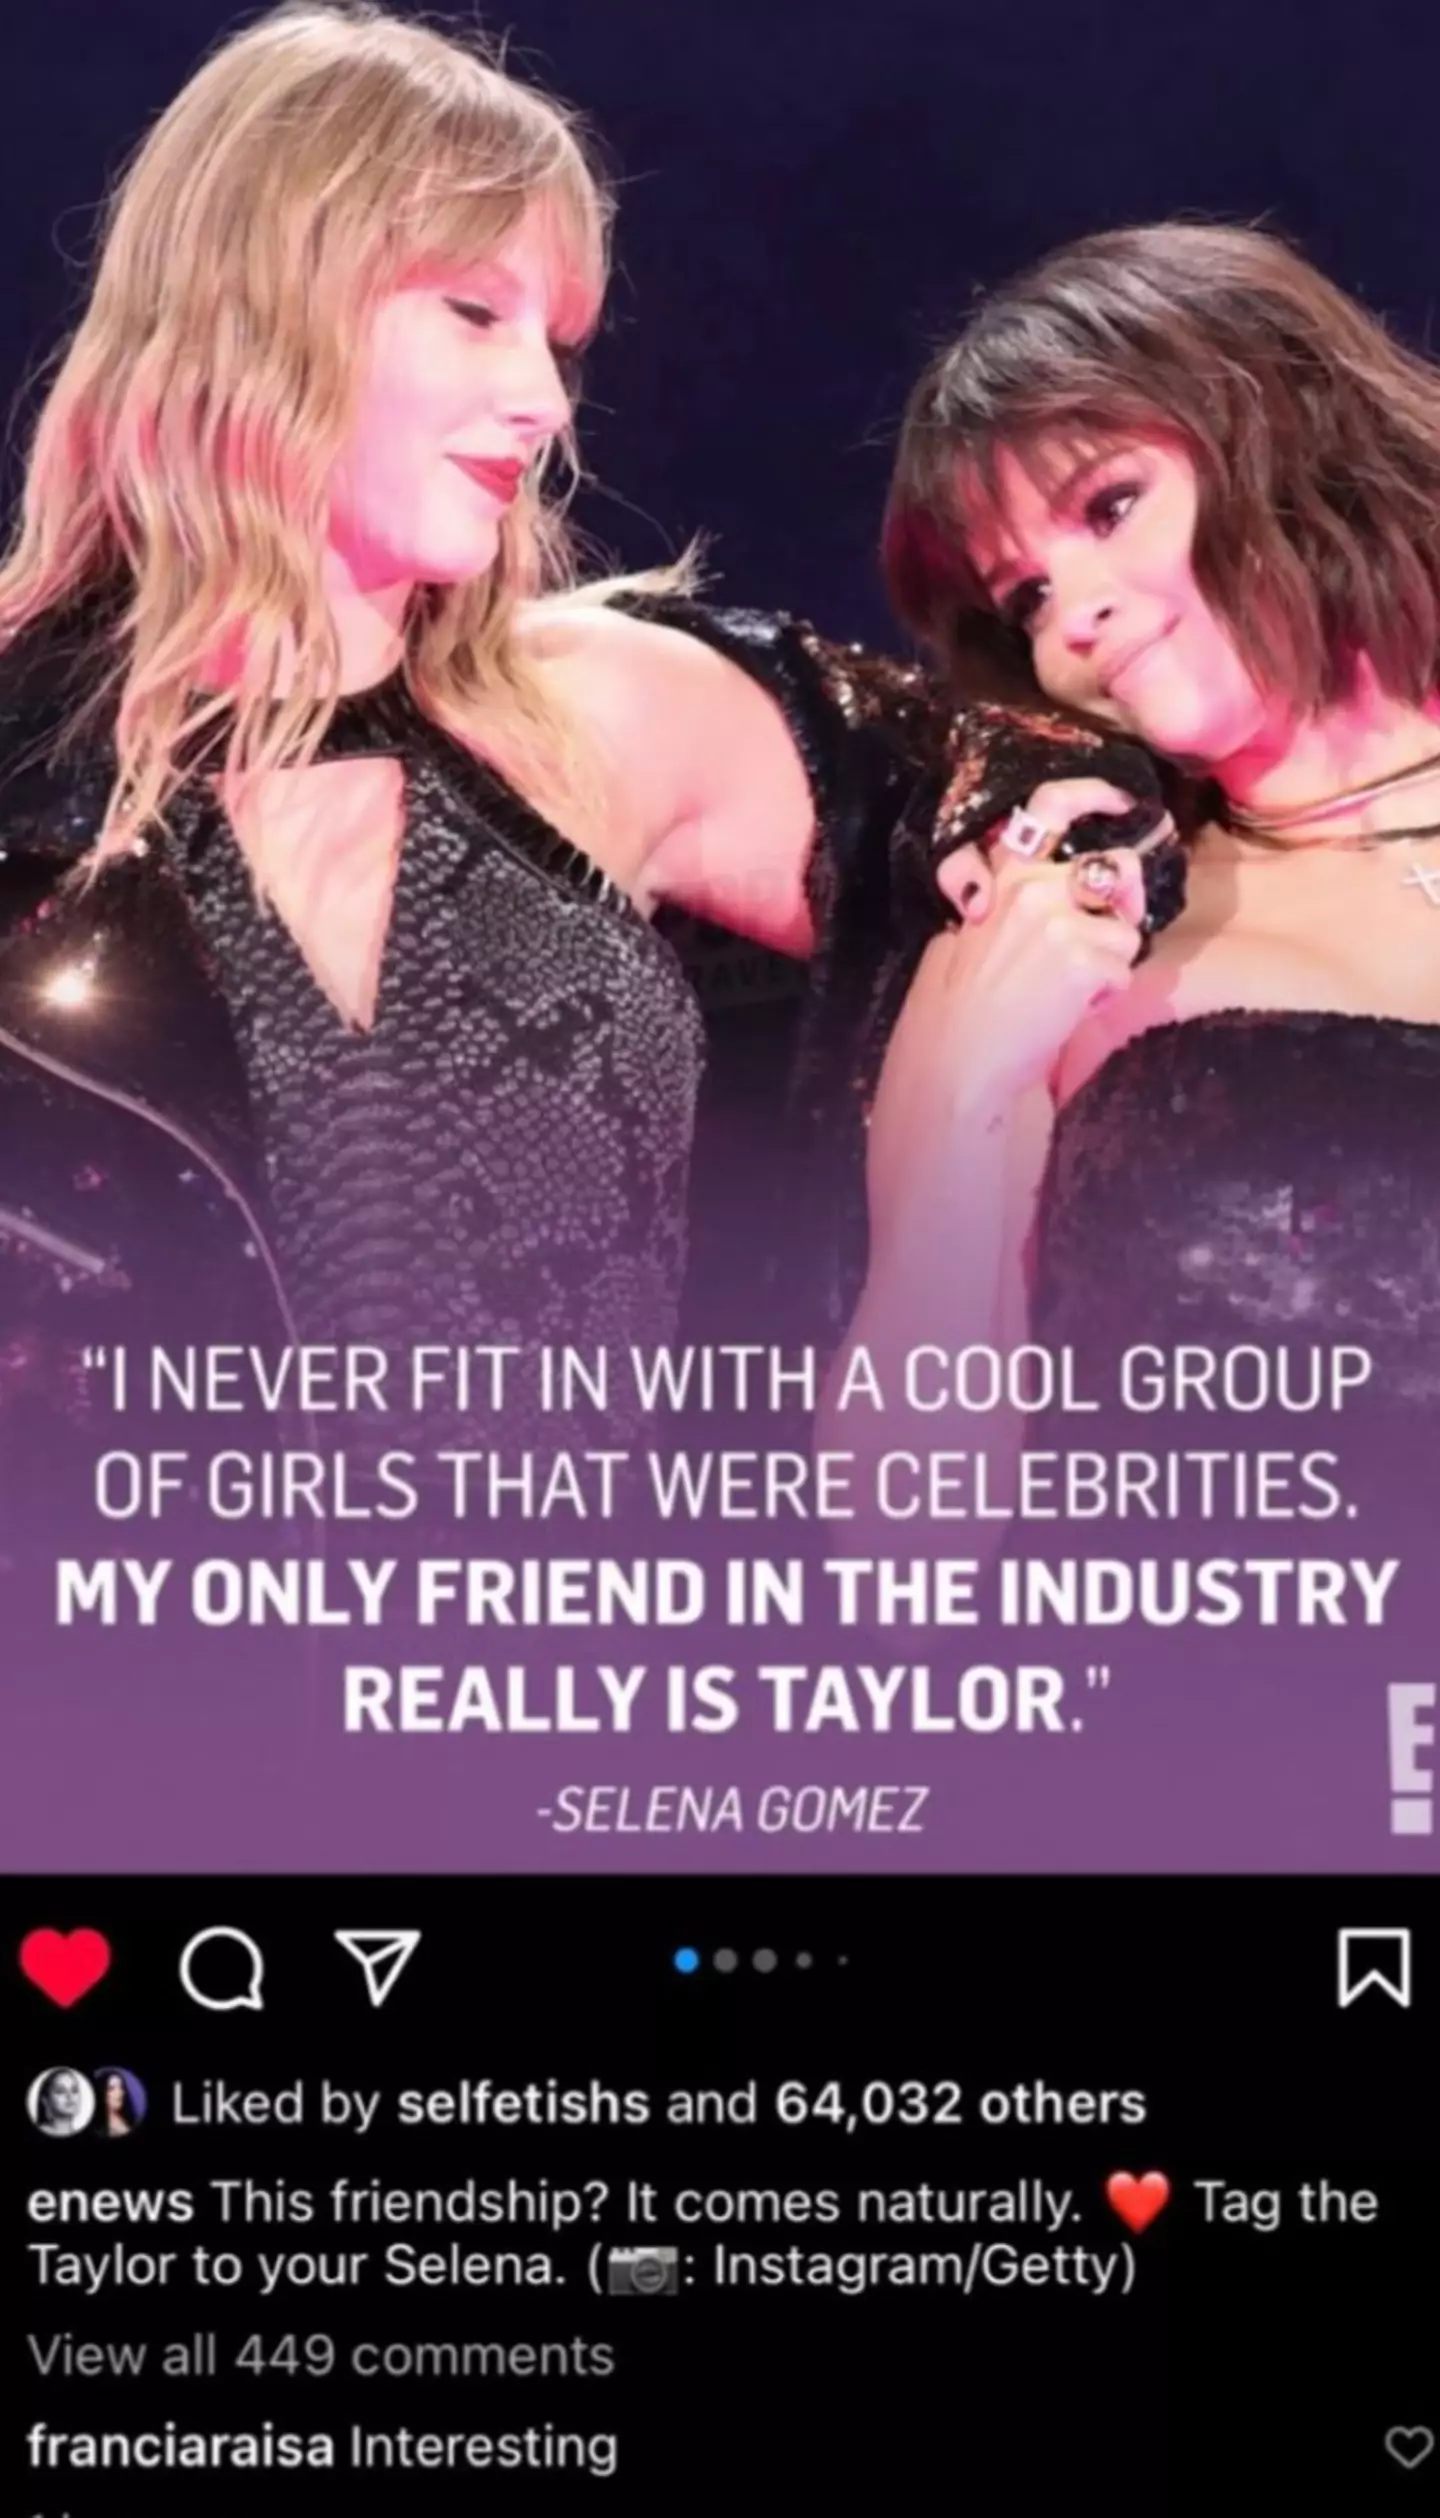 Gomez’s recent comment about Taylor Swift being her ‘only friend in the industry’ seems to have ignited the alleged drama.